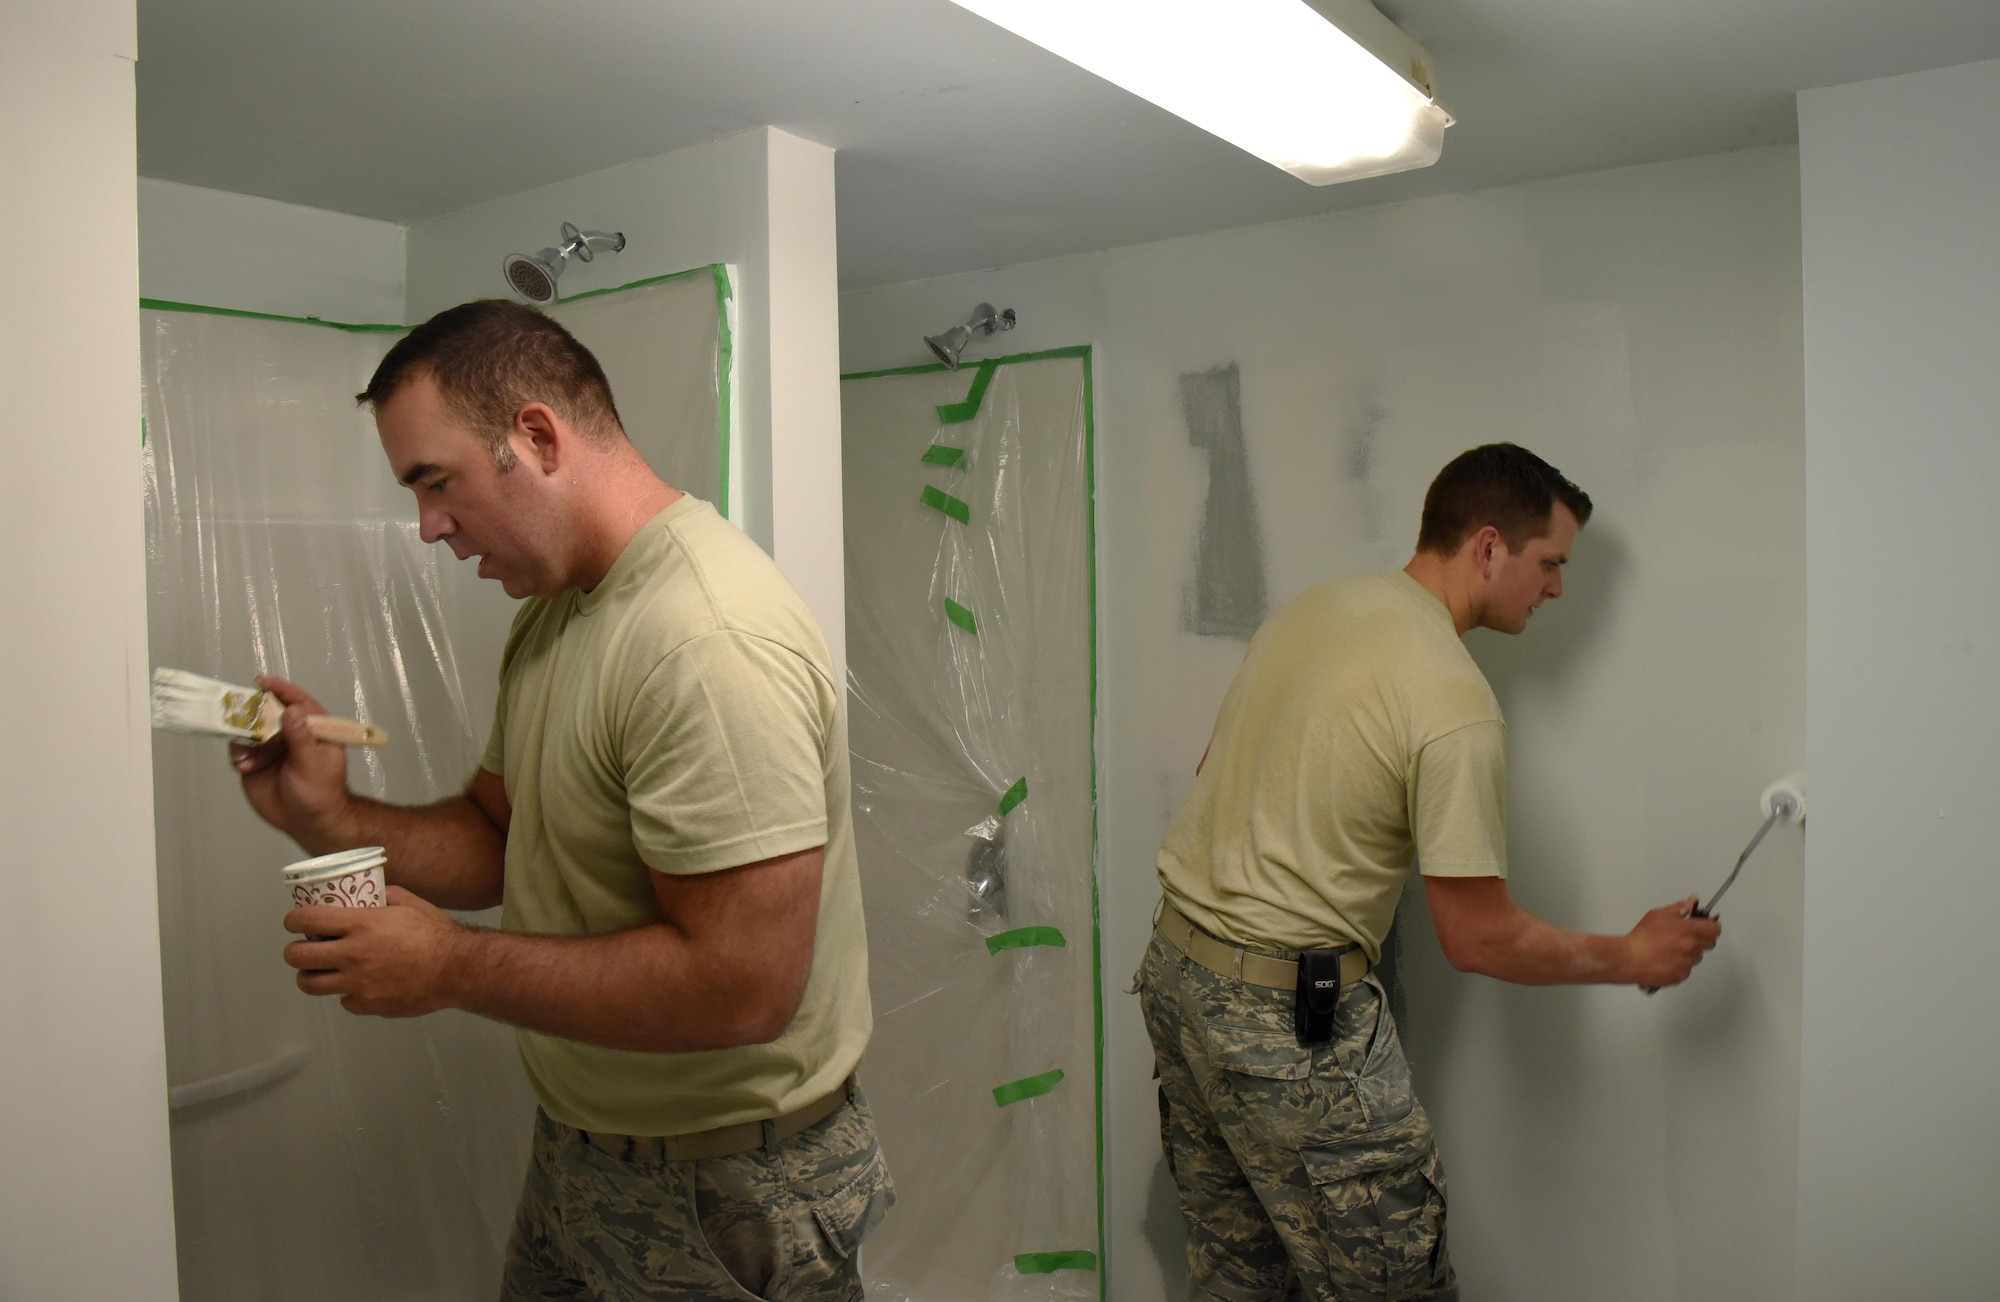 Oregon Air National Guard Staff Sgt. Tyler O'Bryant (left), and Staff Sgt. Zachariah Lewis (right), assigned to the 142nd Fighter Wing Civil Engineer Squadron, apply paint to  a shower repair project during their Deployment For Training (DFT) in Yellowknife, Northwest Territories, Canada, July 27, 2017. The Oregon Airmen are also collaborating with Canadian Armed Forces members from Cold Lake, Alberta, who are also deployed to Yellowknife for training. (U.S. Air National Guard photo/Master Sgt. John Hughel, 142nd Fighter Wing Public Affairs)